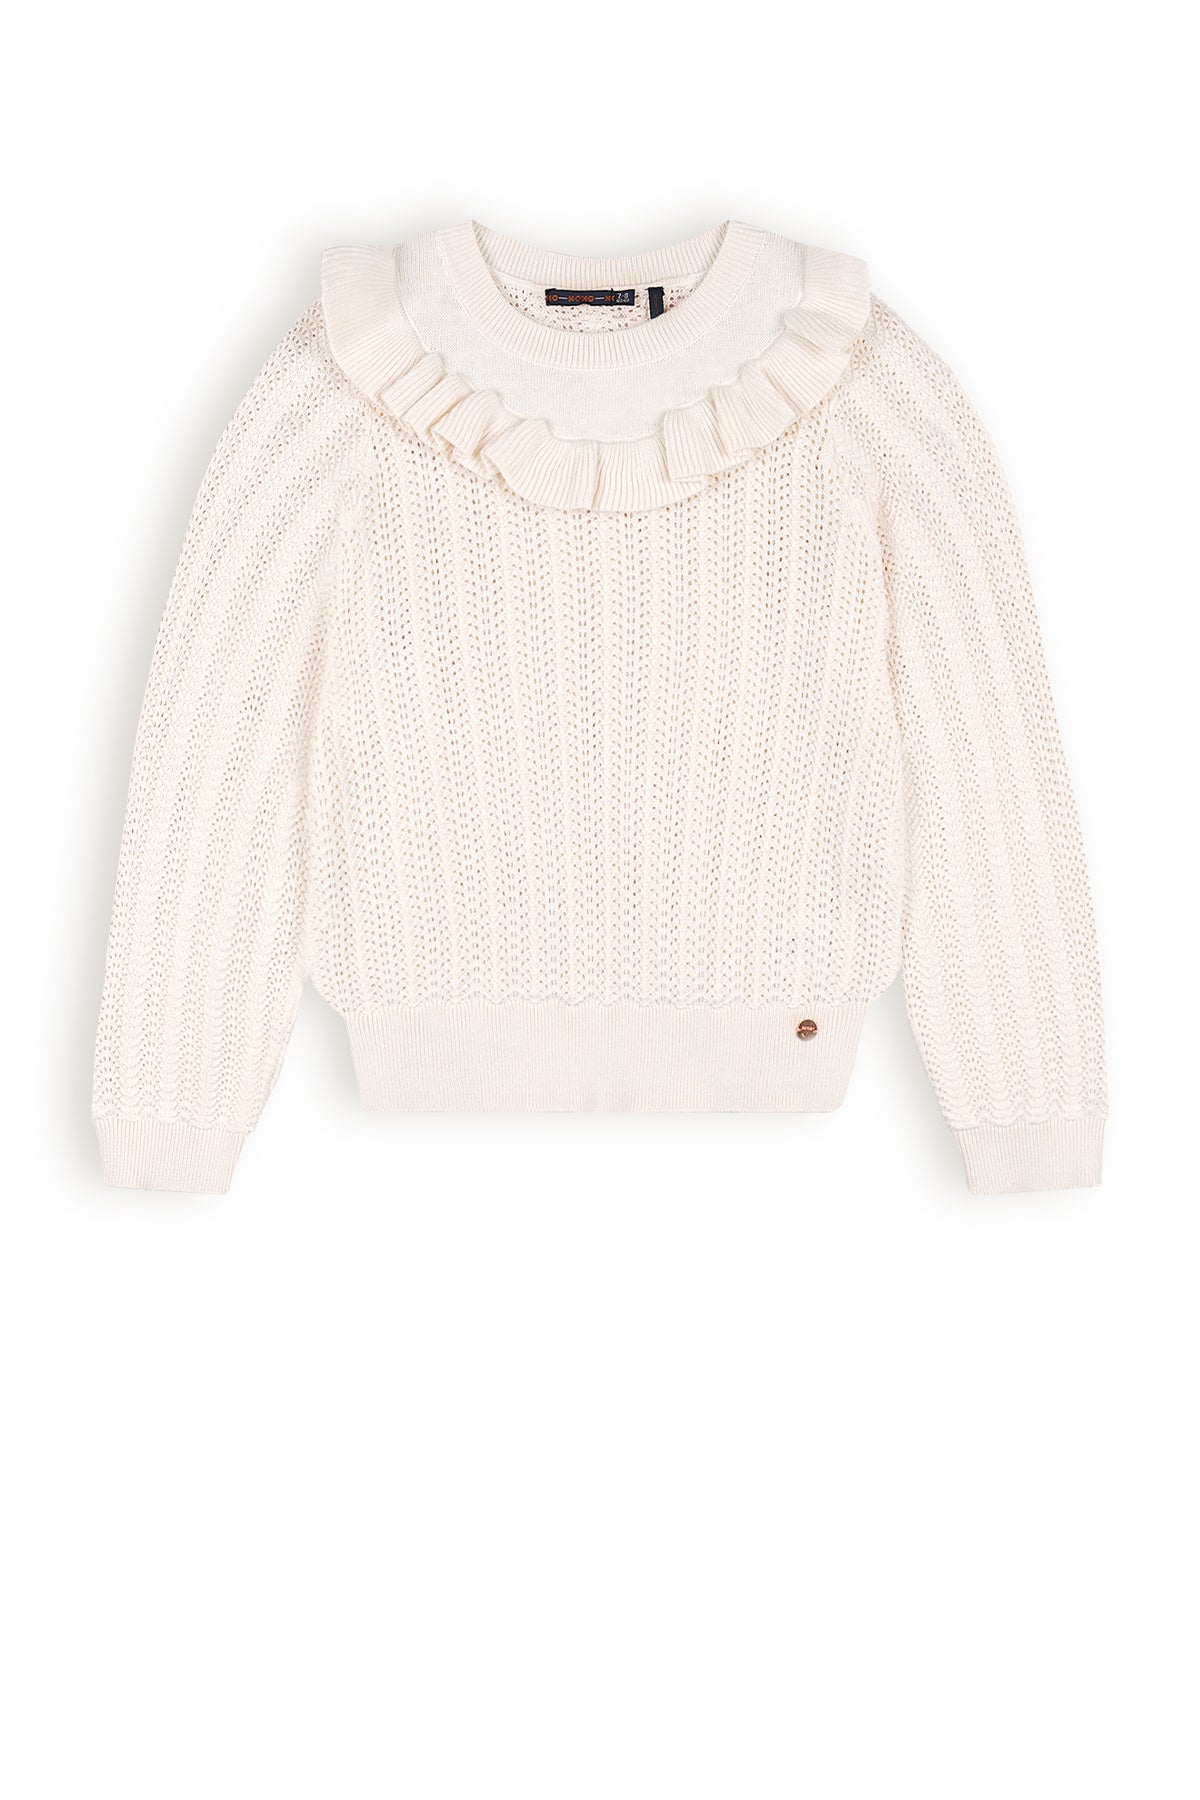 NoNo Kerala Ajour Knitted Sweater With Ruffle